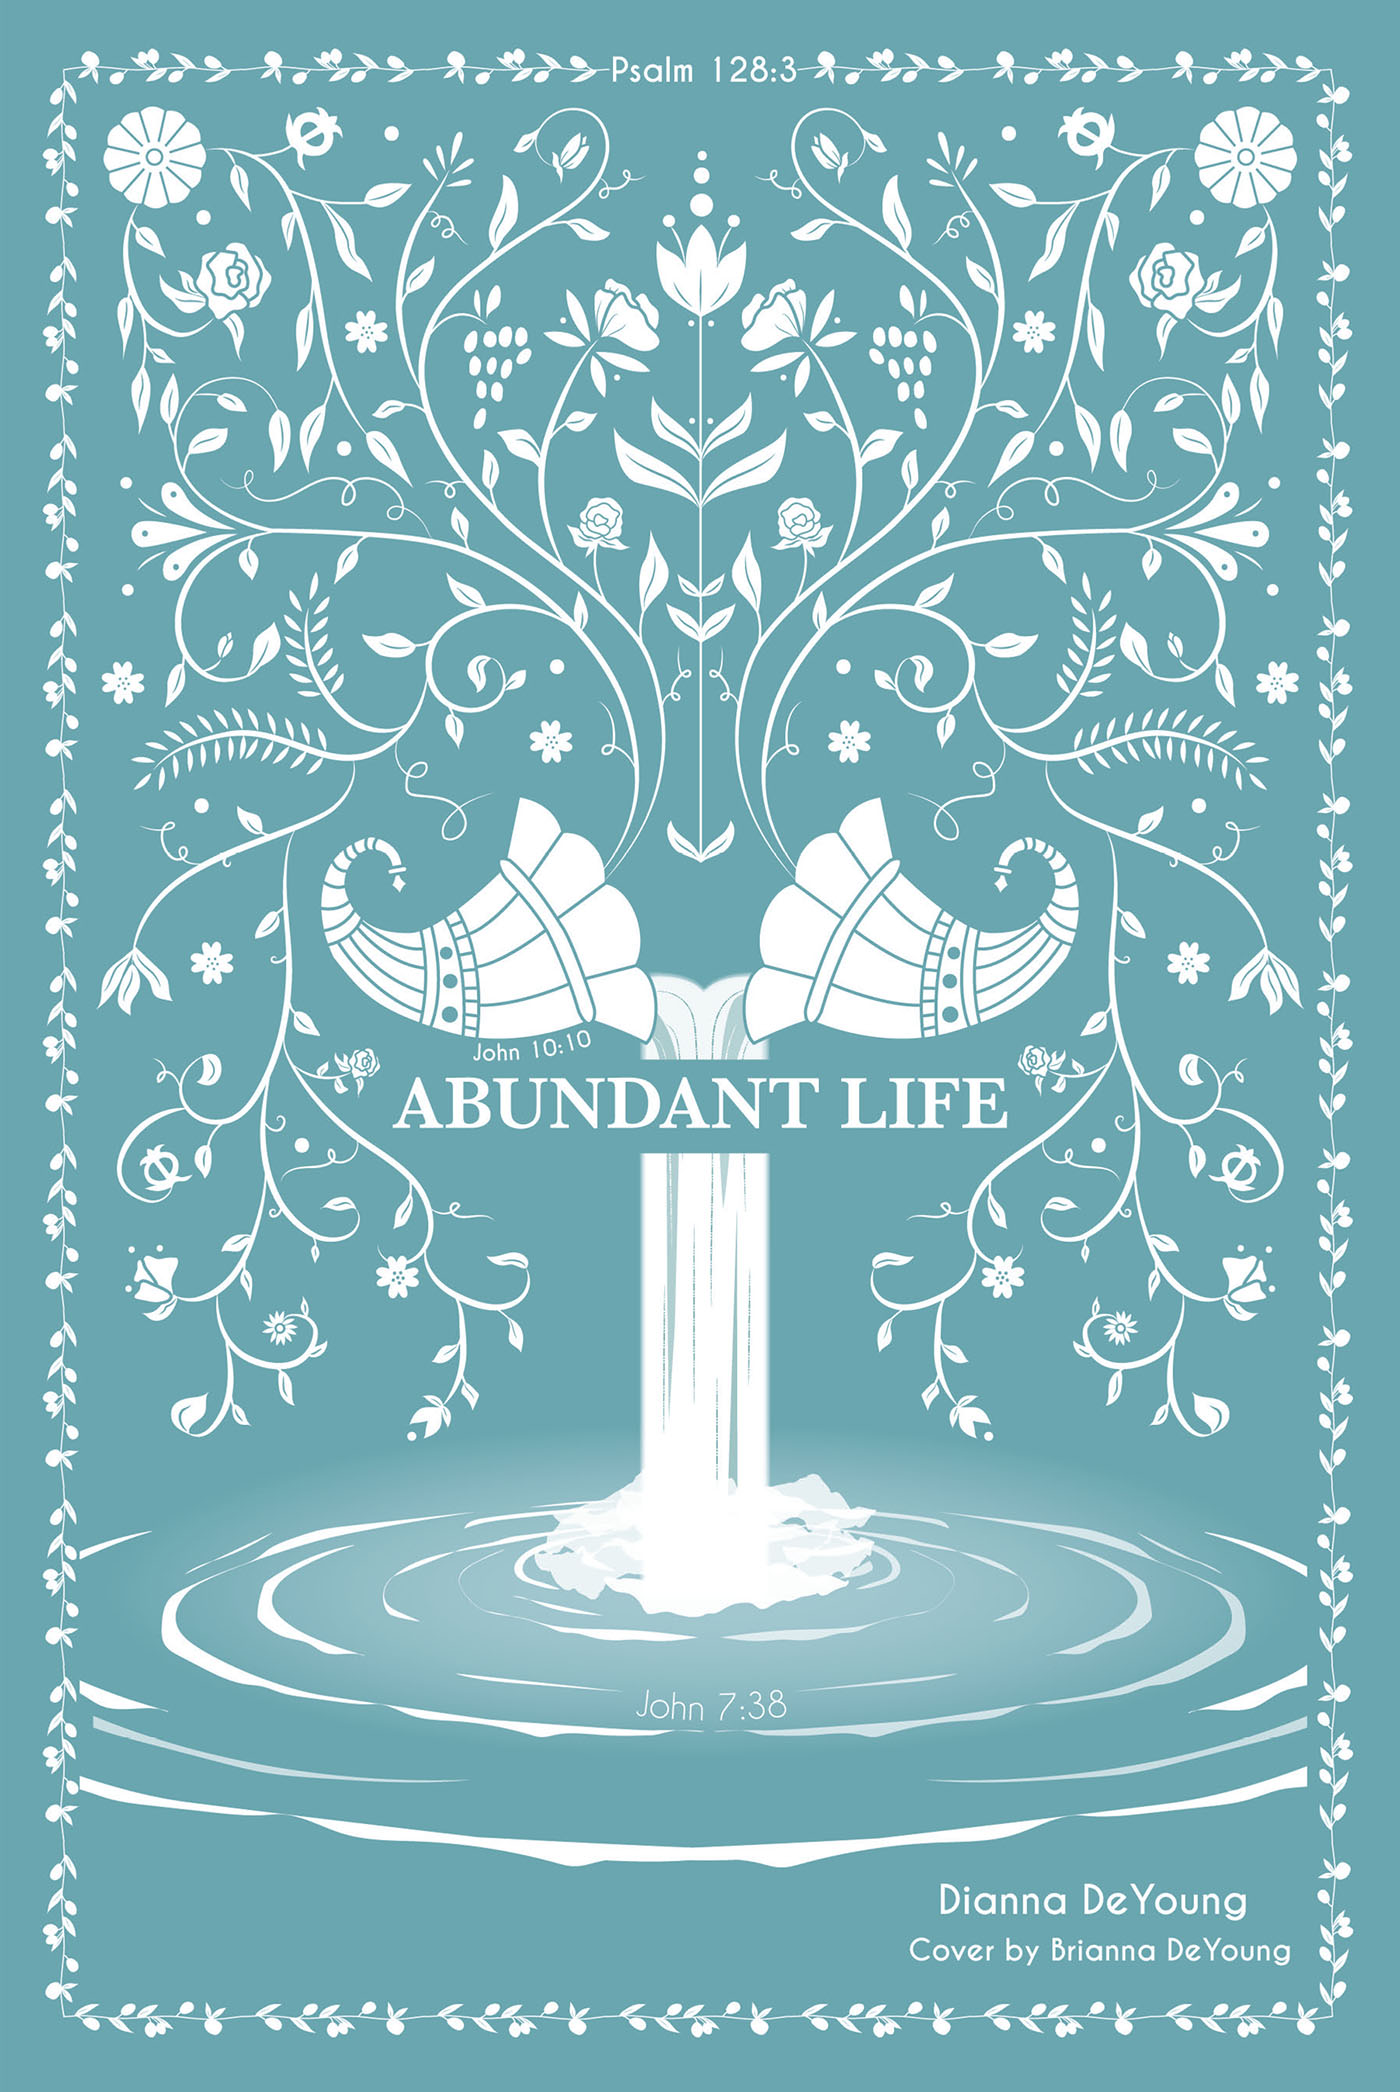 Author Dianna DeYoung’s New Book, “Abundant Life,” is a Powerful Guide to the Higher Living That Can be Possible Through Complete Devotion to the Lord